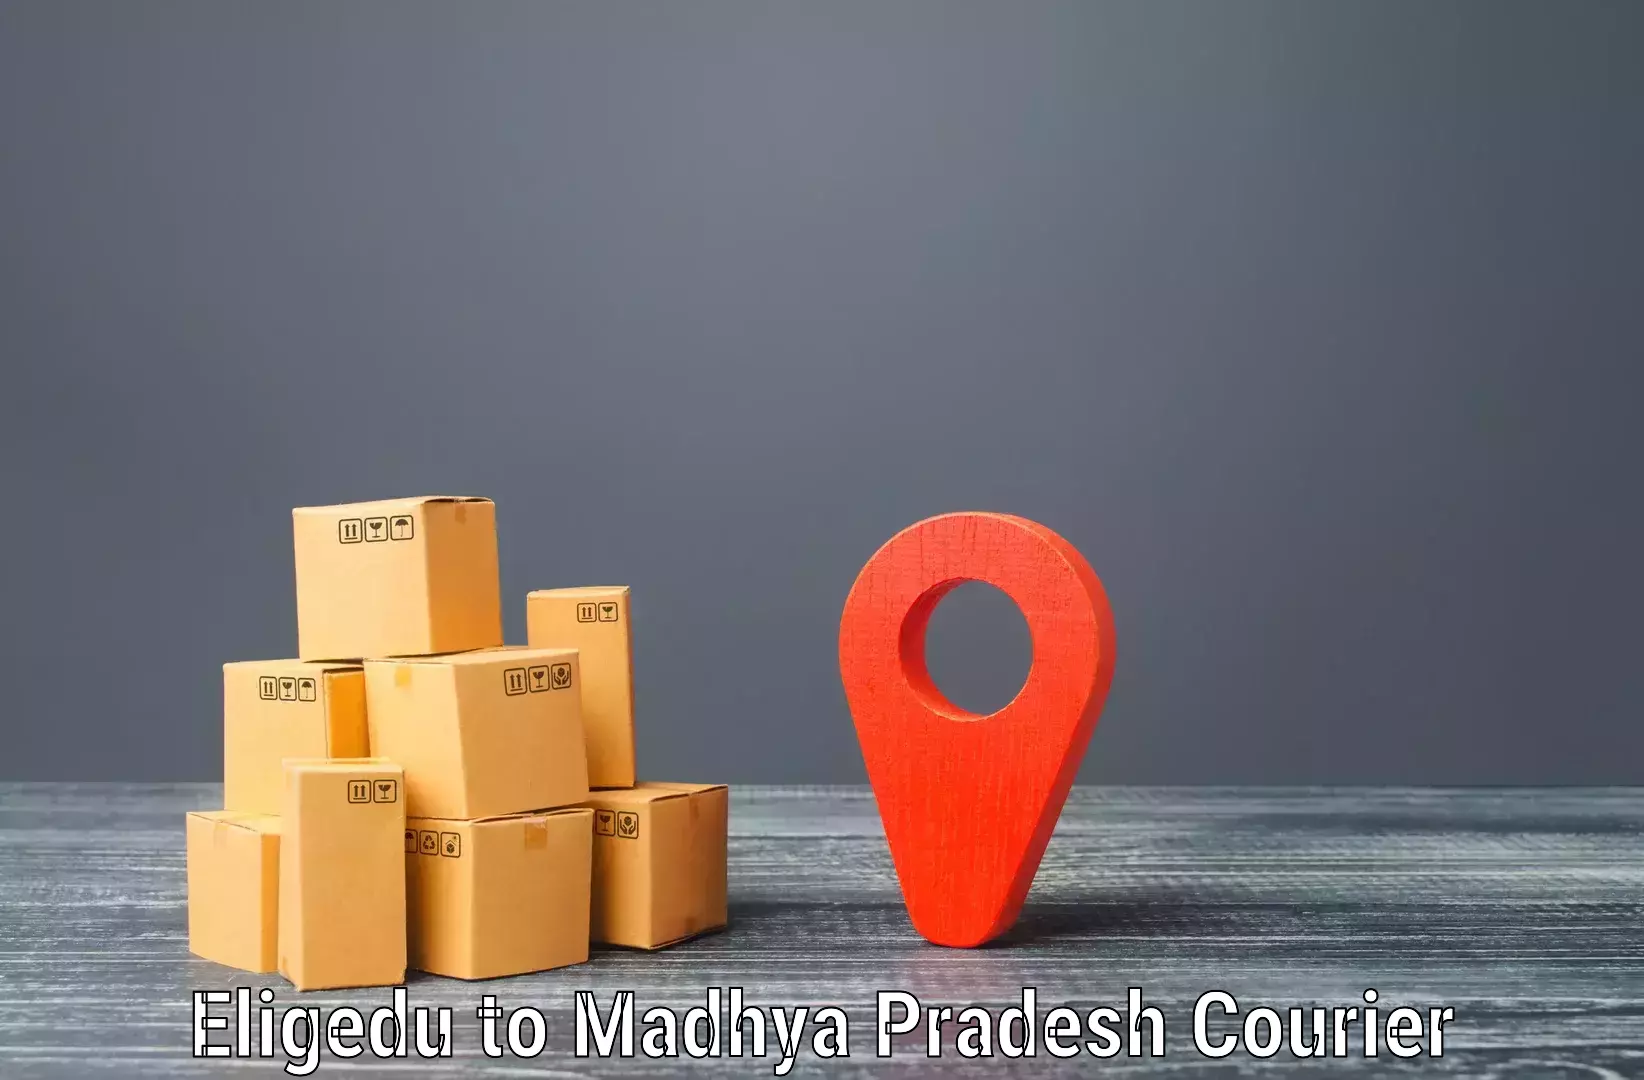 Rapid shipping services Eligedu to Nainpur